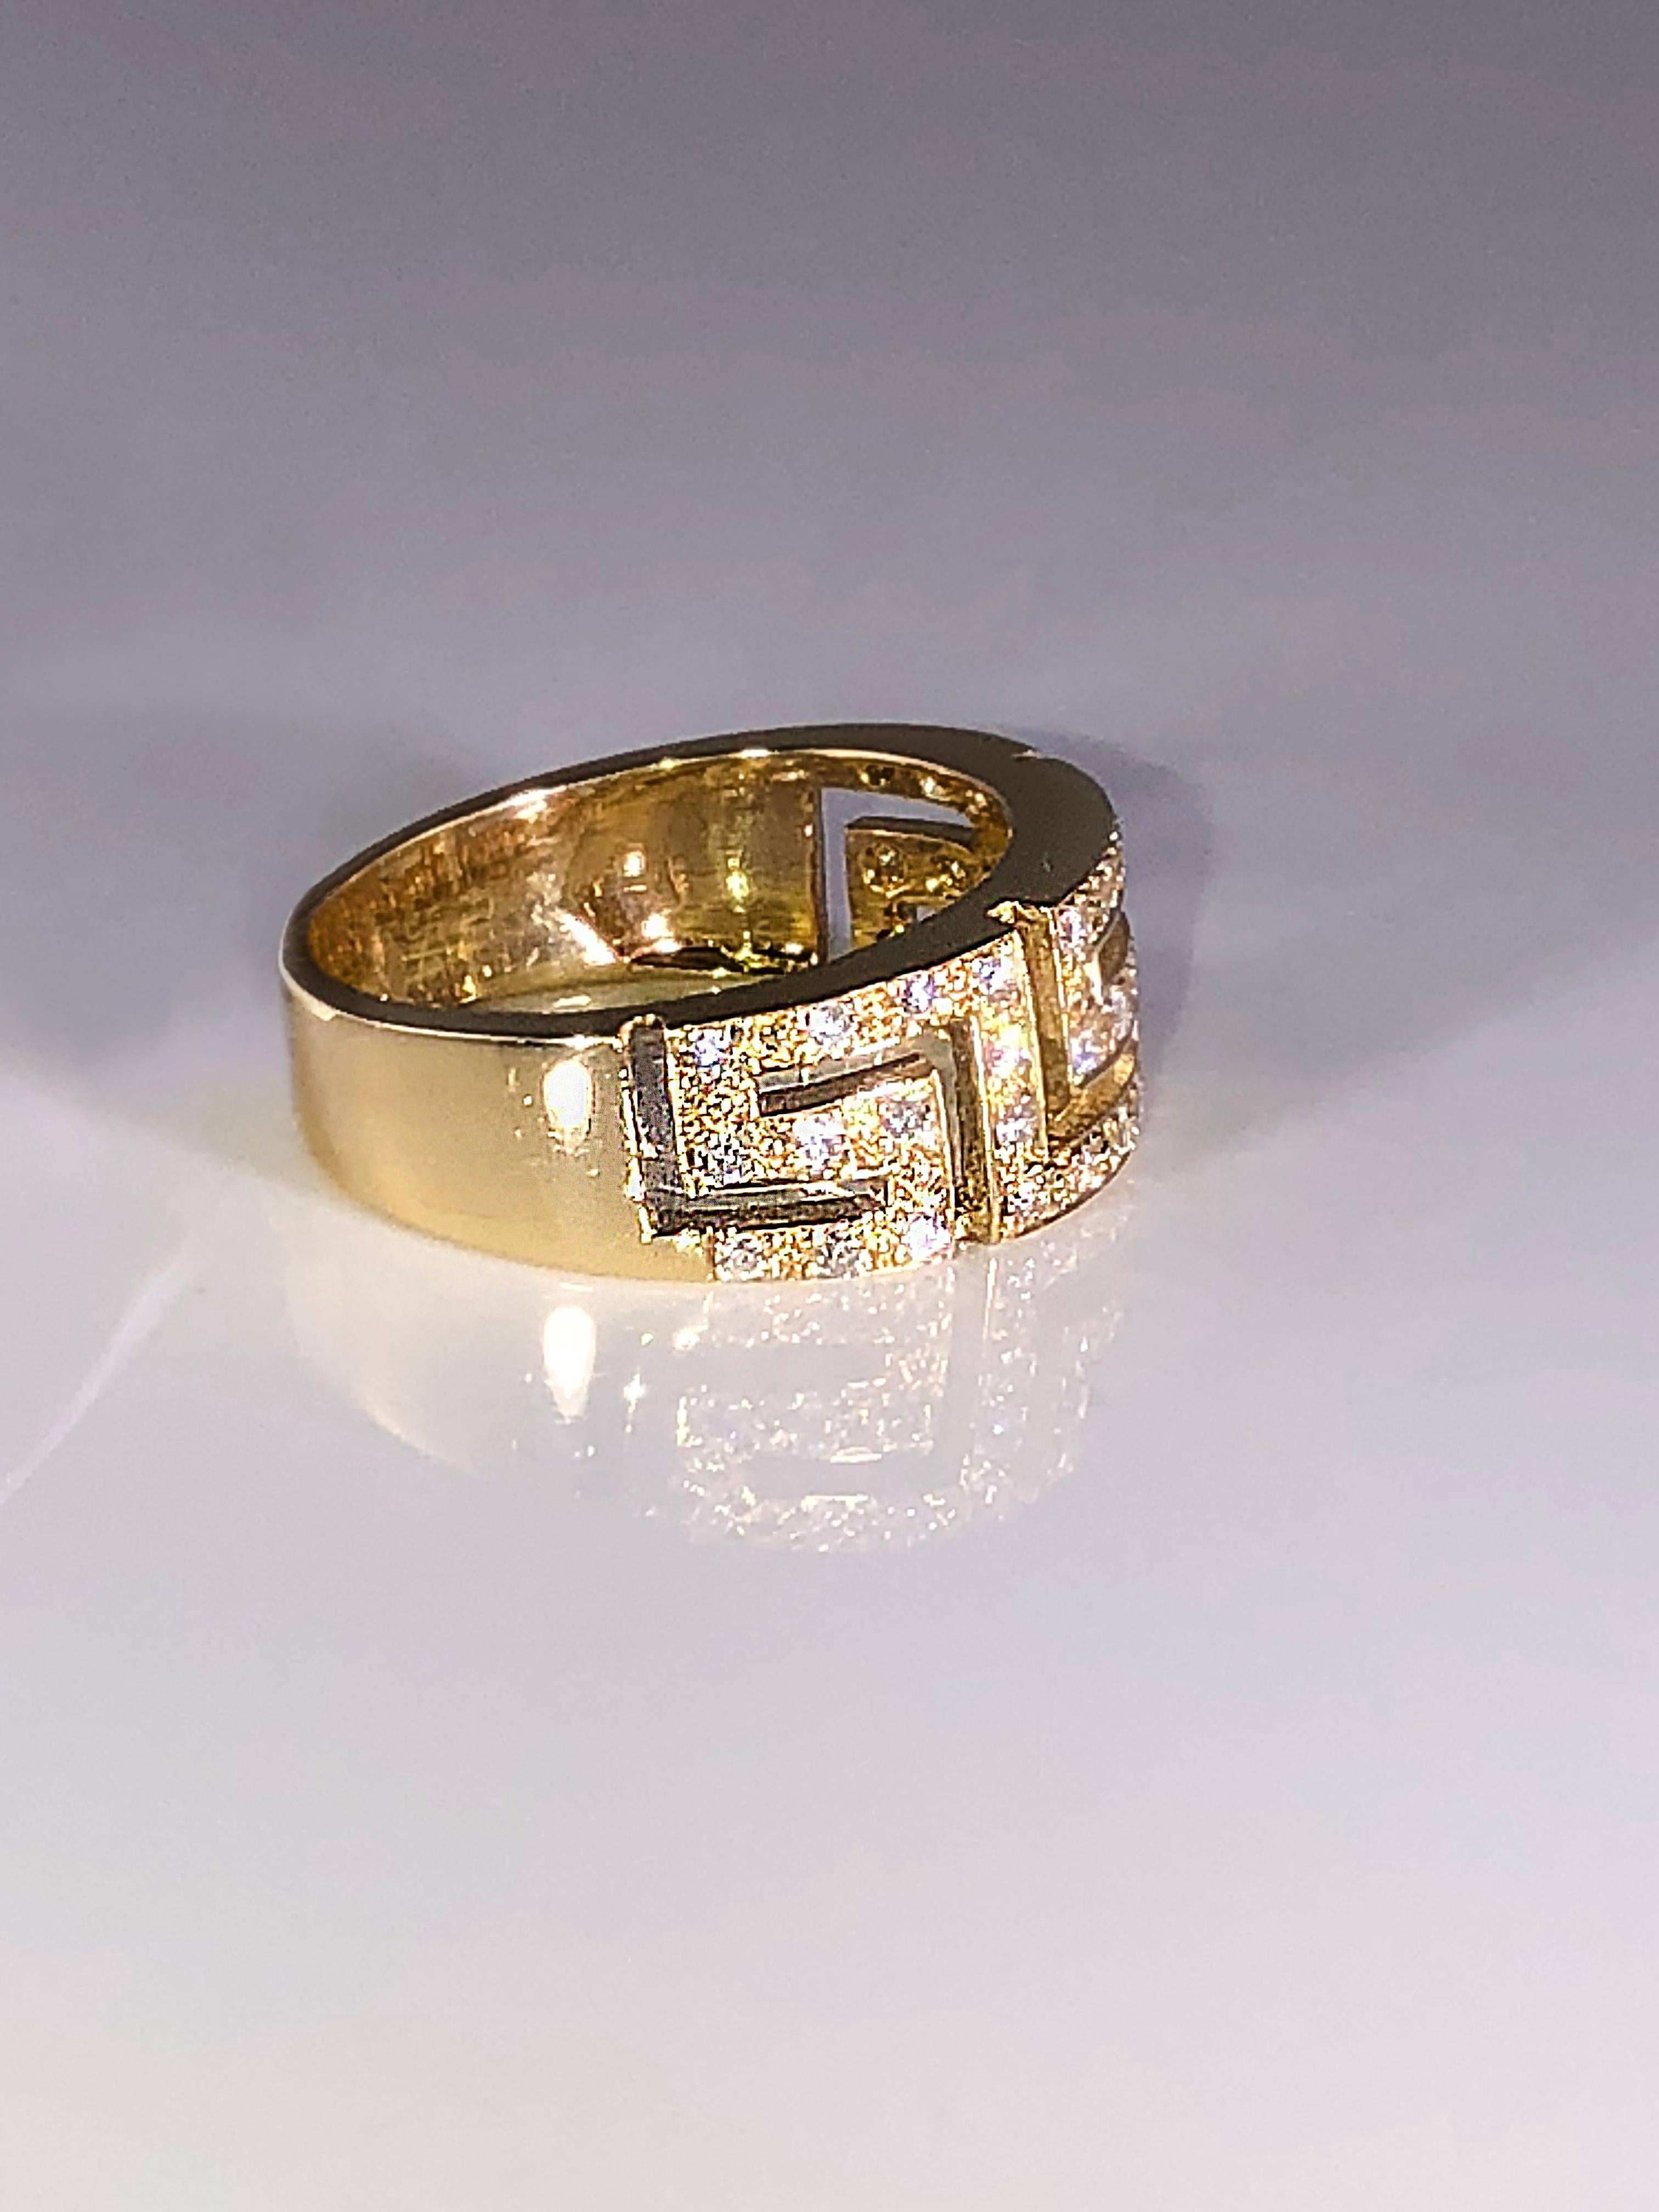 S.Georgios design 18 Karat Yellow Gold Diamond Ring is handmade and features the Greek Key design which symbolizes eternity. It has Brilliant Cut White Diamonds total weight of 0.38 Carat and can also be ordered in White or Rose Gold, please contact